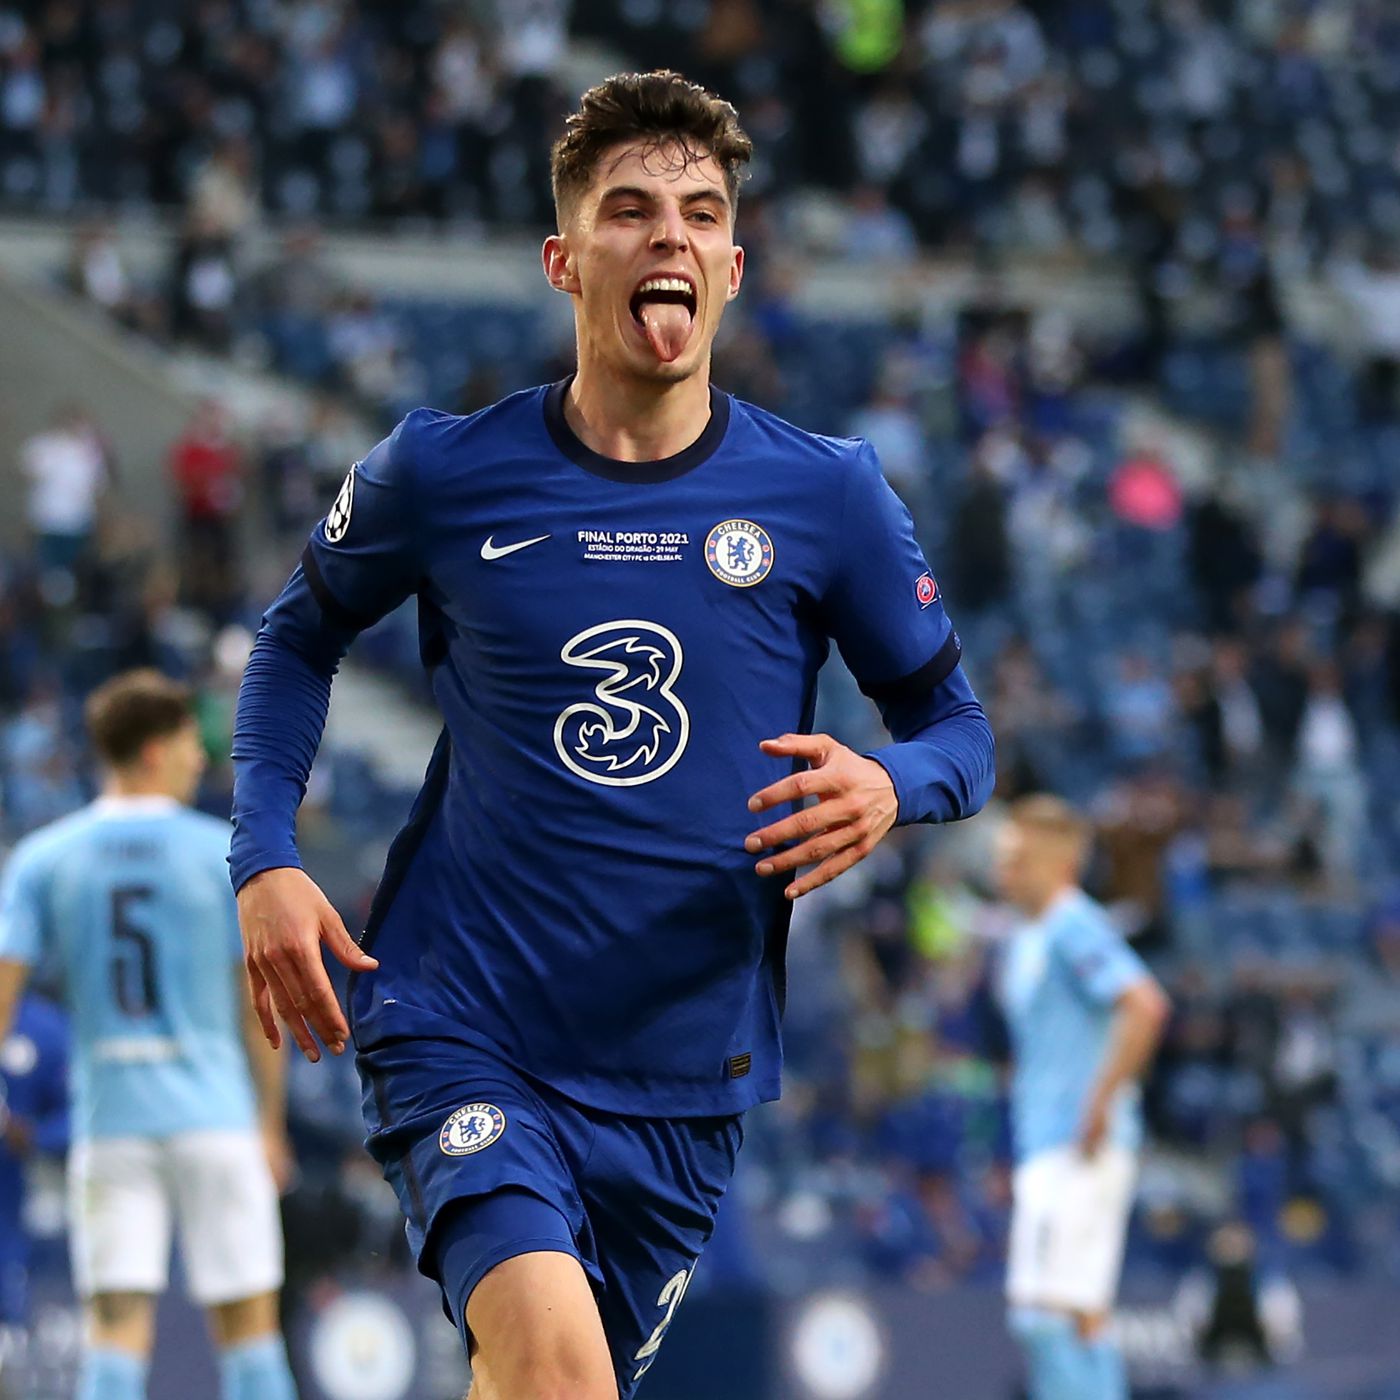 Chelsea Defeats Manchester City 1 0 In The Champions League Finale On A Goal From Kai Havertz! Football Works